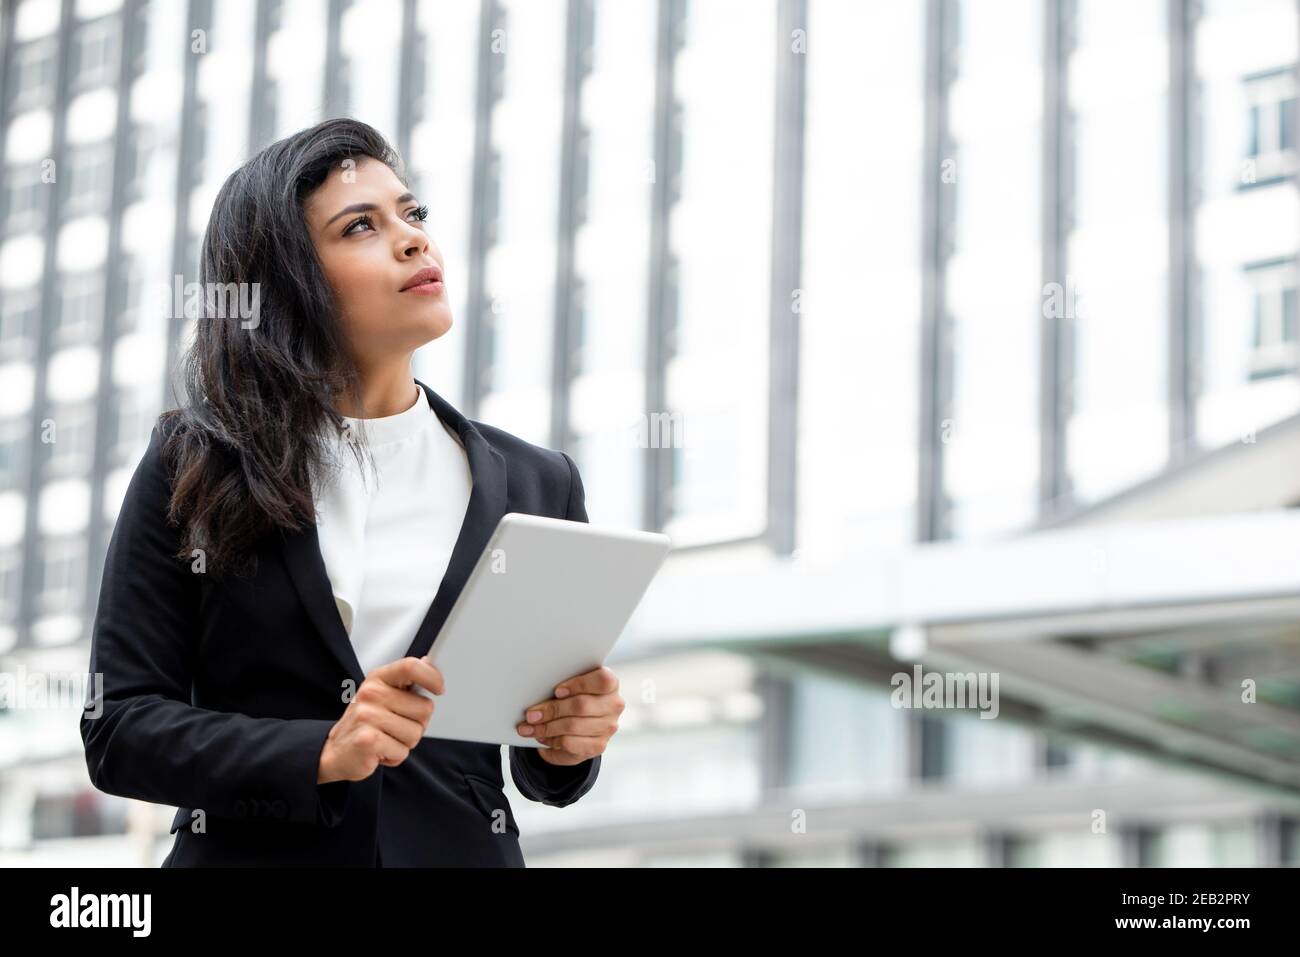 Young beautiful Latin businesswoman holding tablet computer and thinking  in city office building background Stock Photo